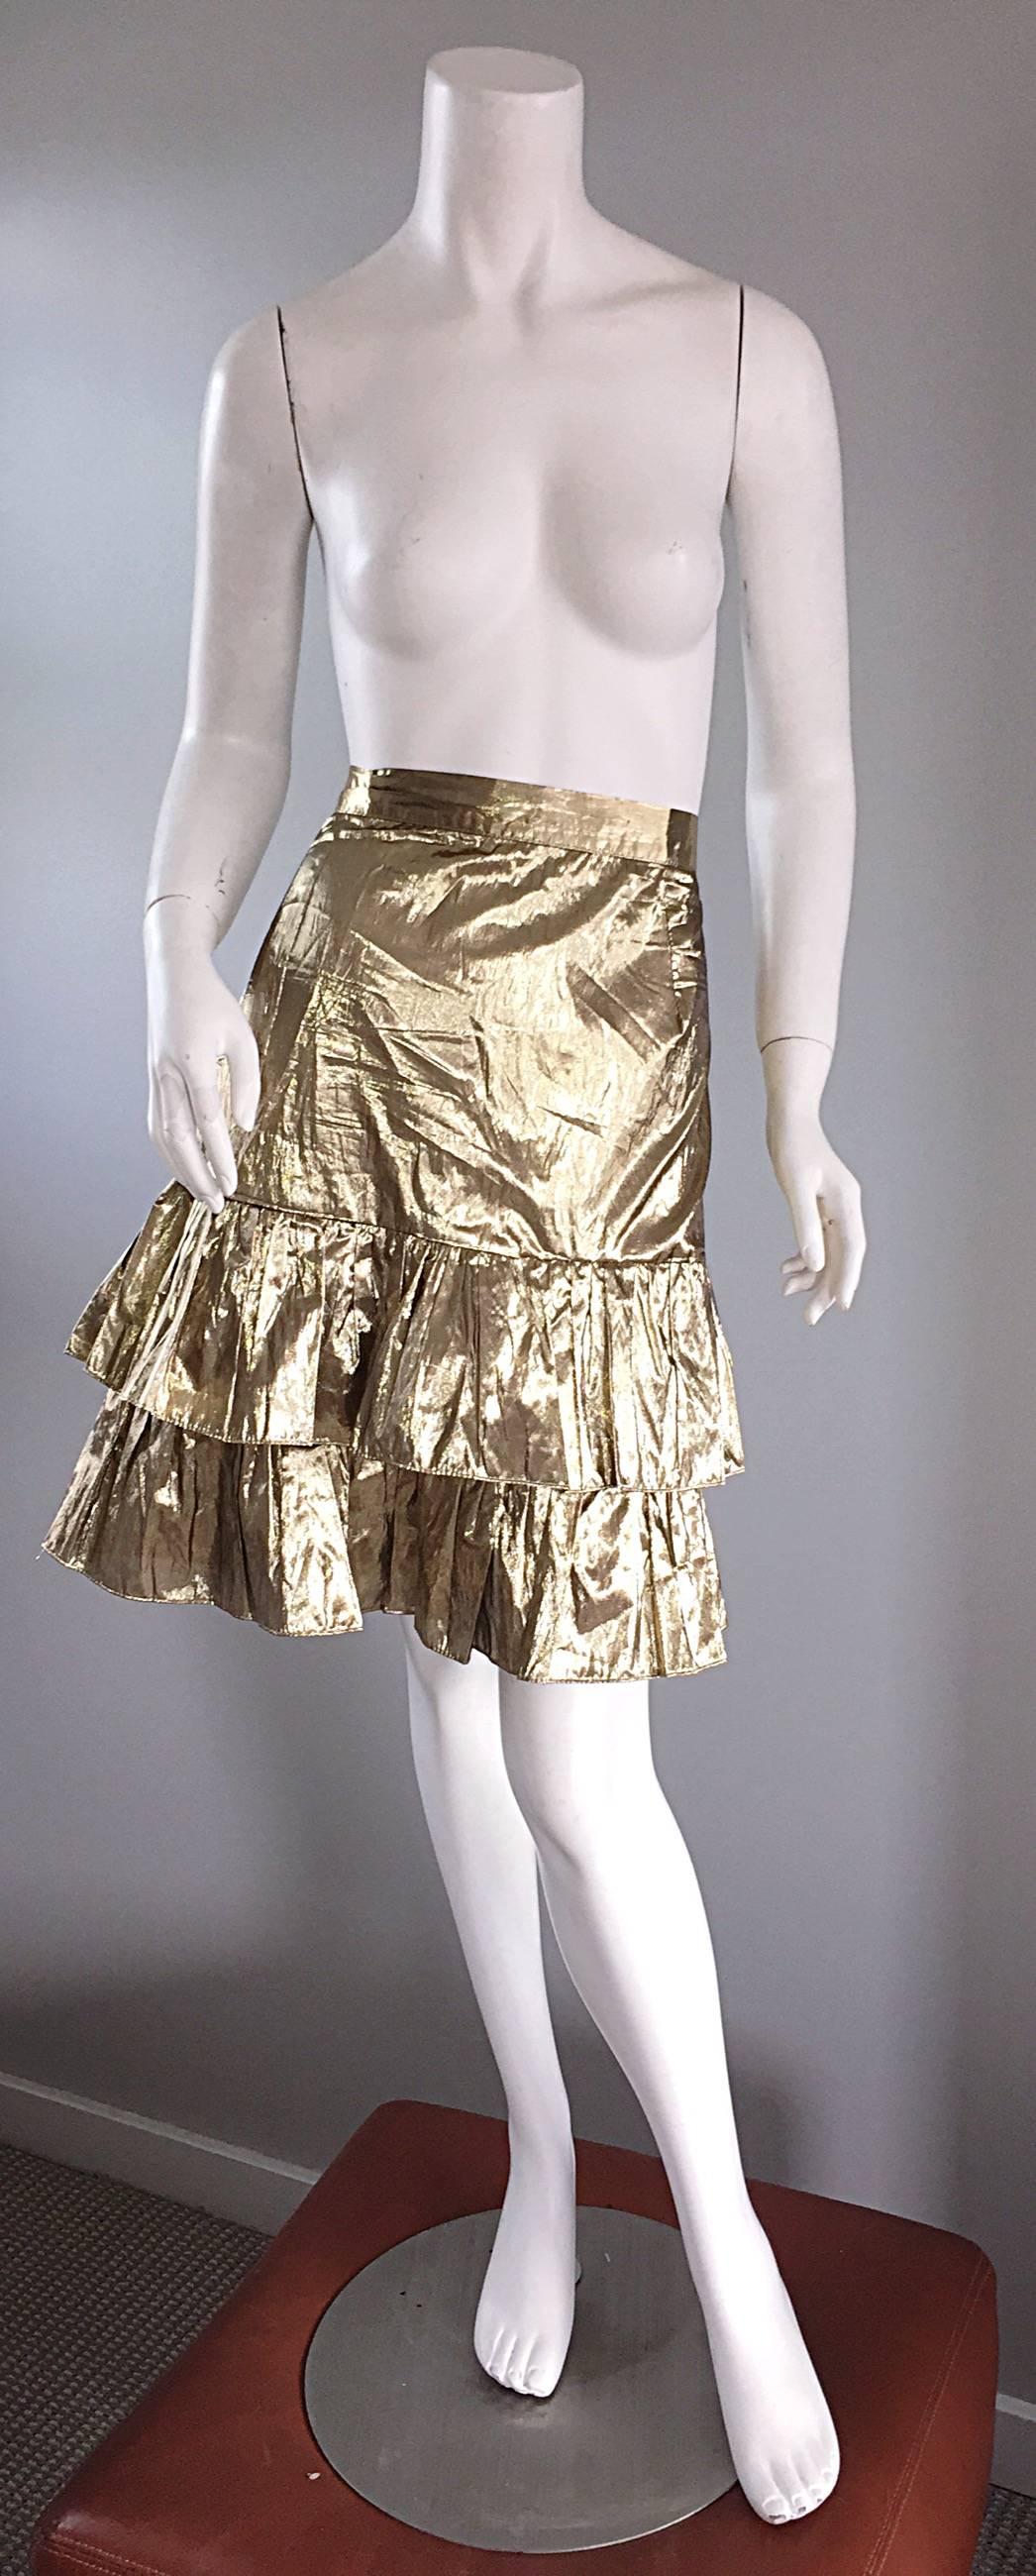 WOW!!!! Incredible 1980s gold metallic skirt, by Stonewear! This chic little skirt features a high waist, with two rows of accordion pleats at the hem. Can easily be dressed up or down. Looks great with a vintage concert tee, yet perfect with a